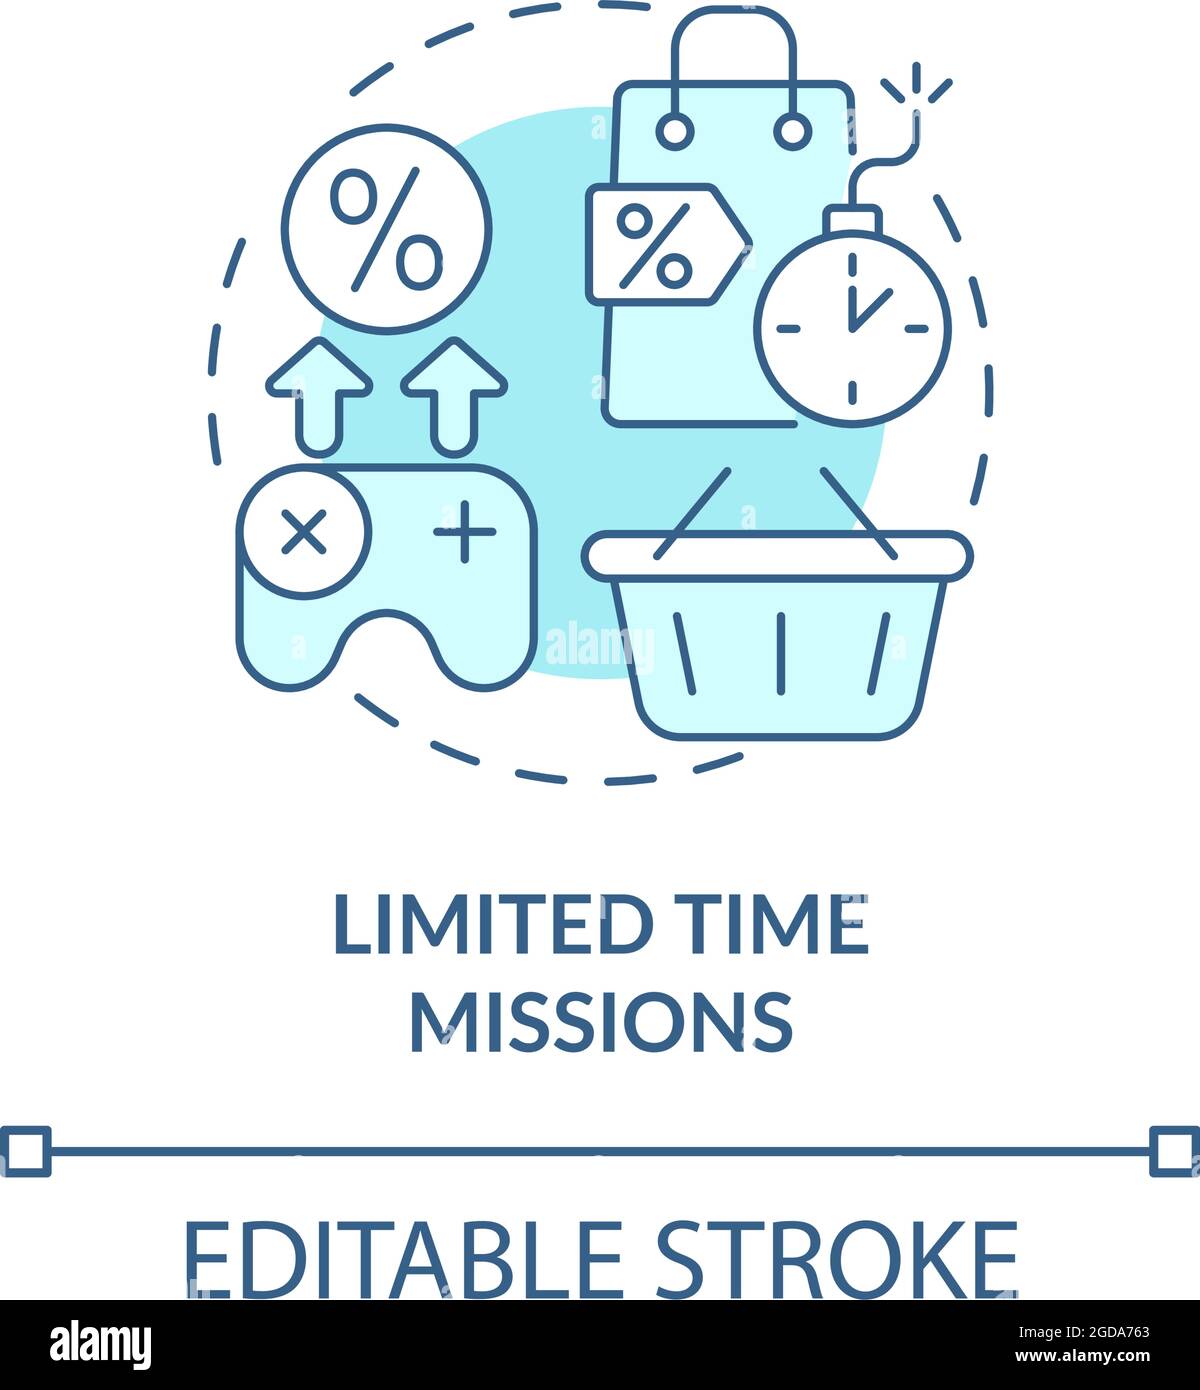 Limited time missions blue concept icon Stock Vector